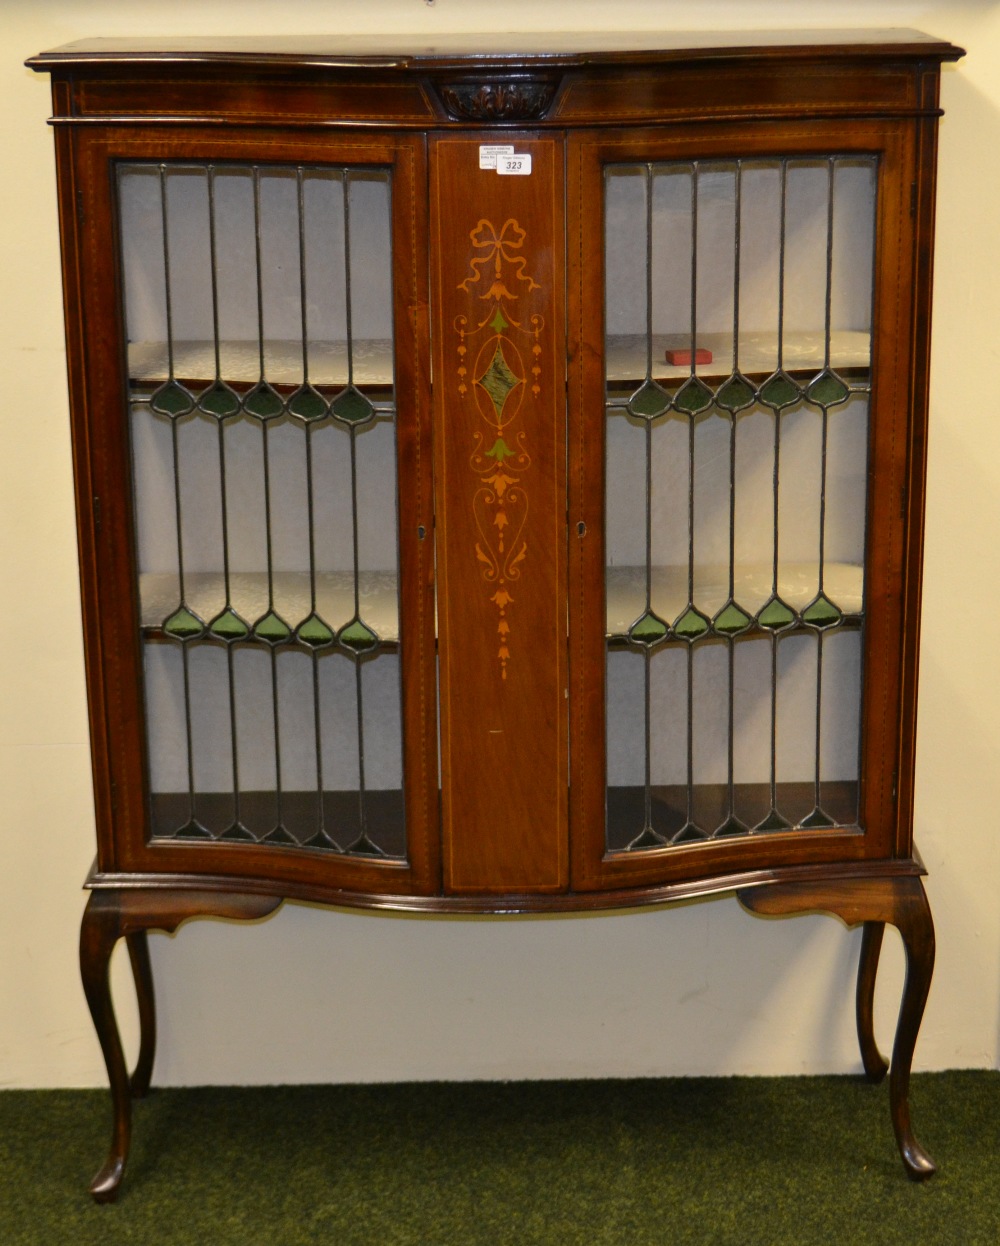 Edwardian mahogany inlaid two-door display cabinet raised on Queen Ann supports